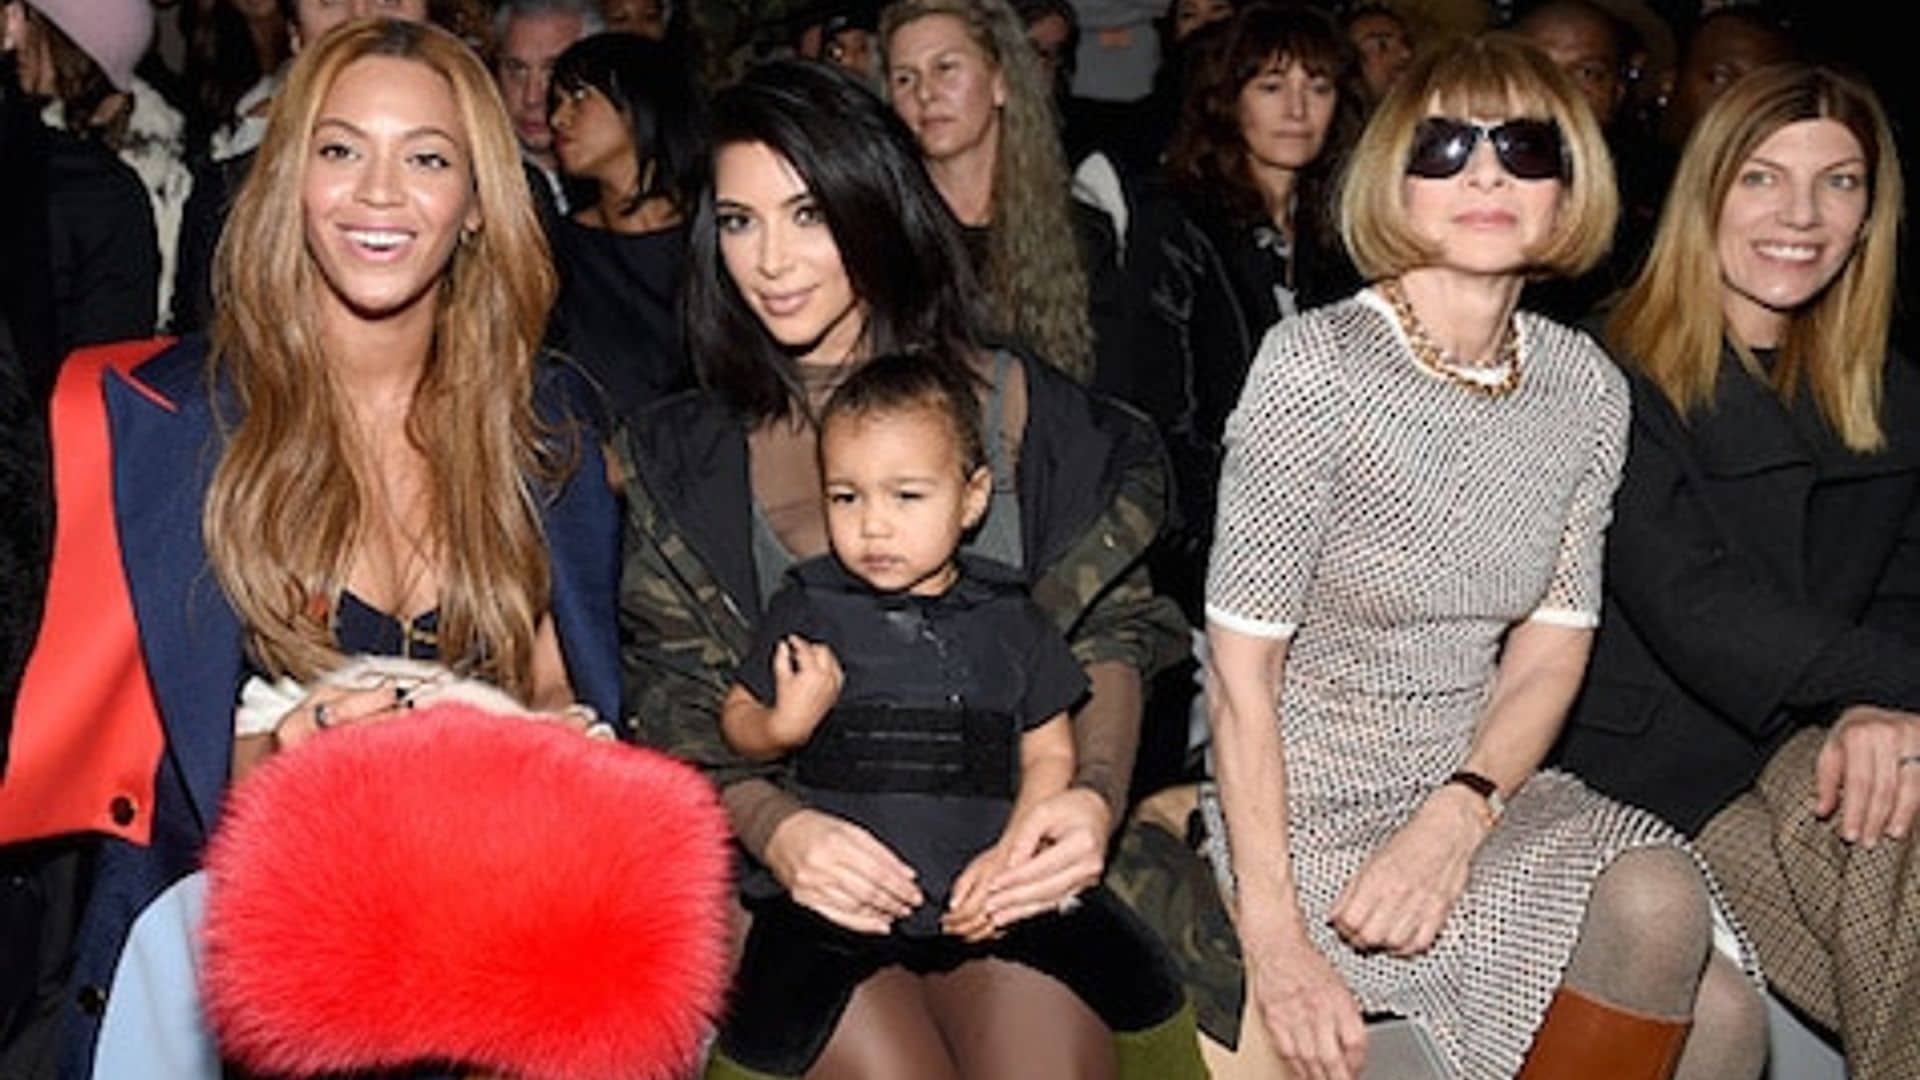 North hung out in the front row of her dad's first fashion show for Adidas Originals with mom Kim, family friend Beyonce, and Vogue's Anna Wintour.
Photo: Getty Images